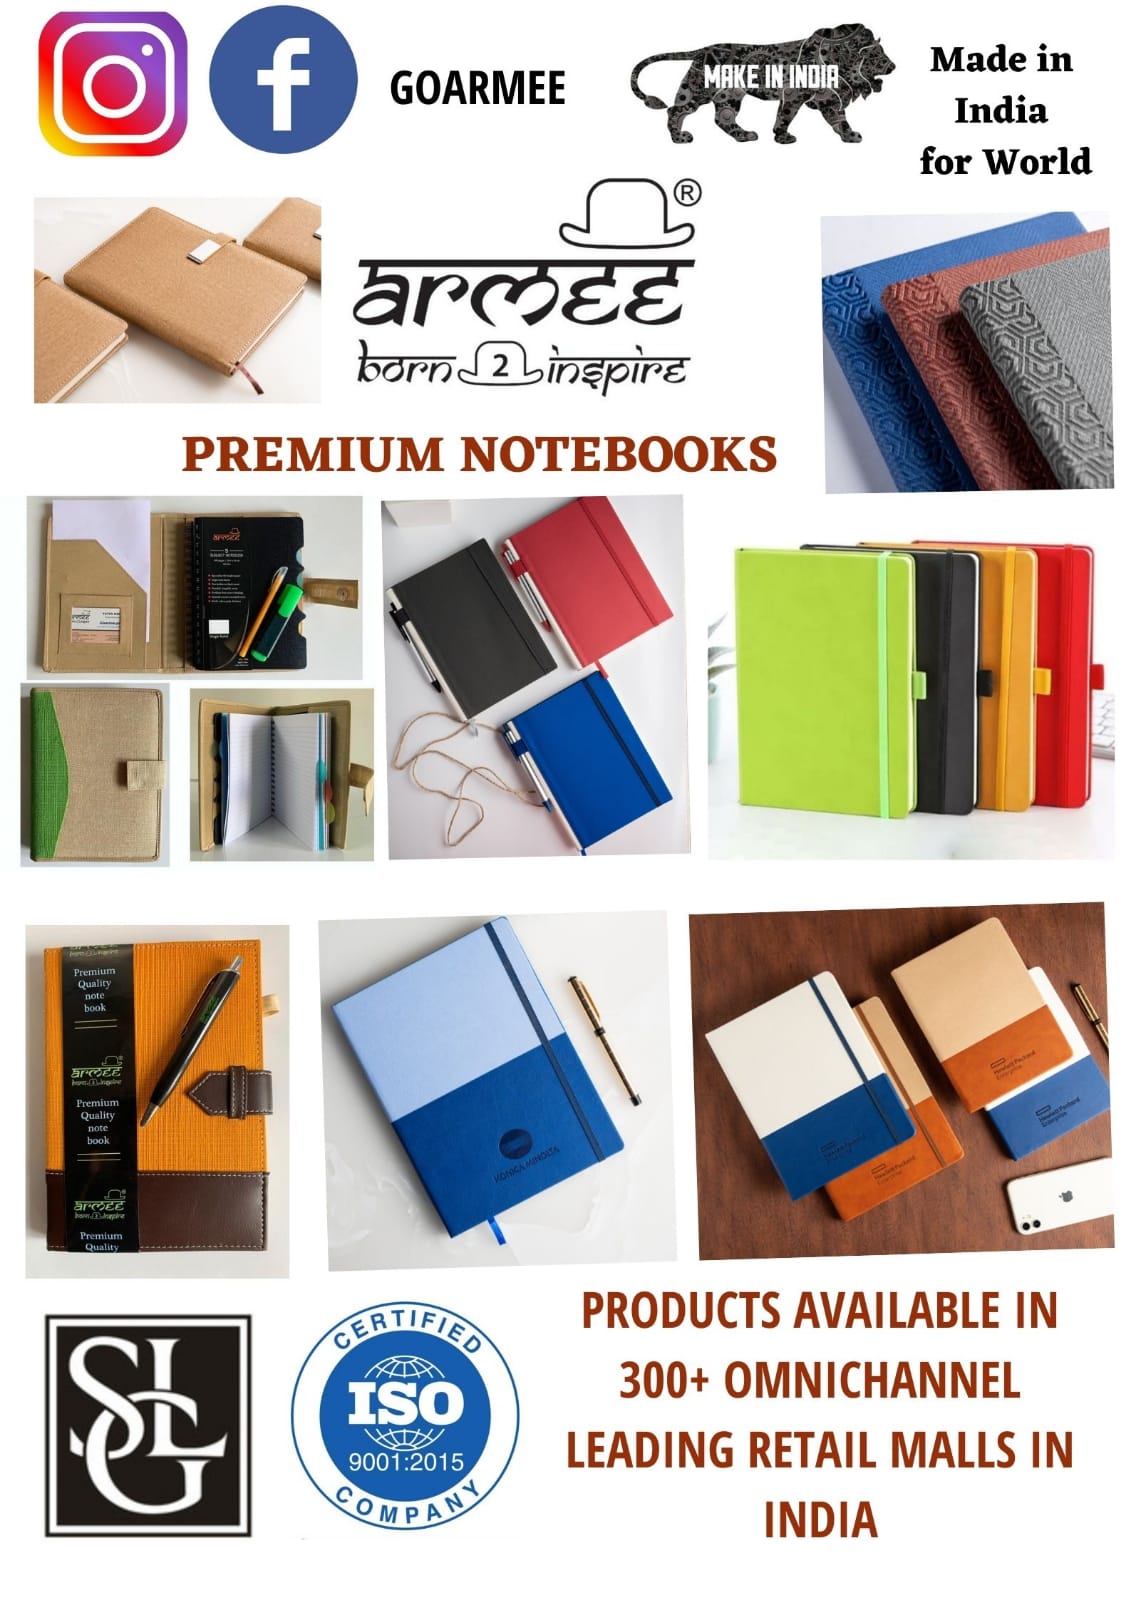 Stationery & Gifting Products From Armee  from Armee Corporate Lifestyle